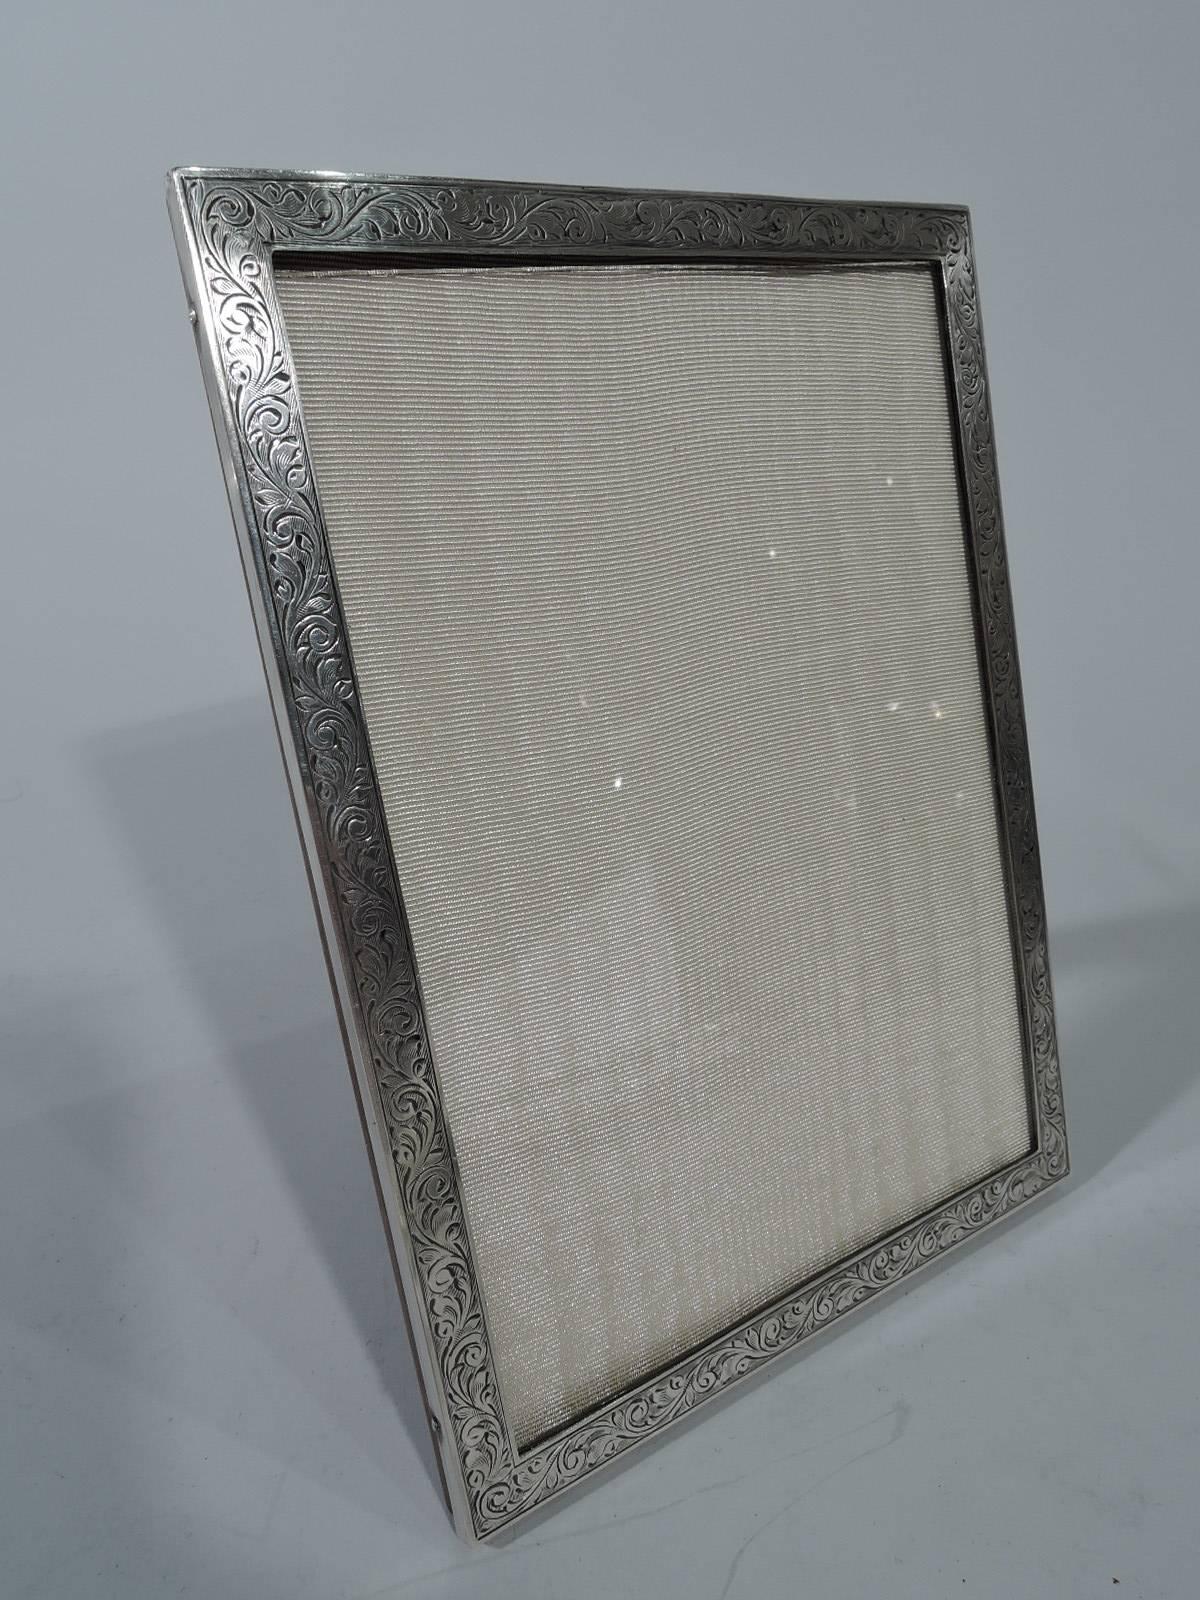 Pretty old-fashioned sterling silver picture frame. Made by Charles S. Green & Co., Ltd in Birmingham in 1953. Rectangular window bordered by engraved scrollwork. With glass, silk lining, and stained-wood back and hinged support for portrait